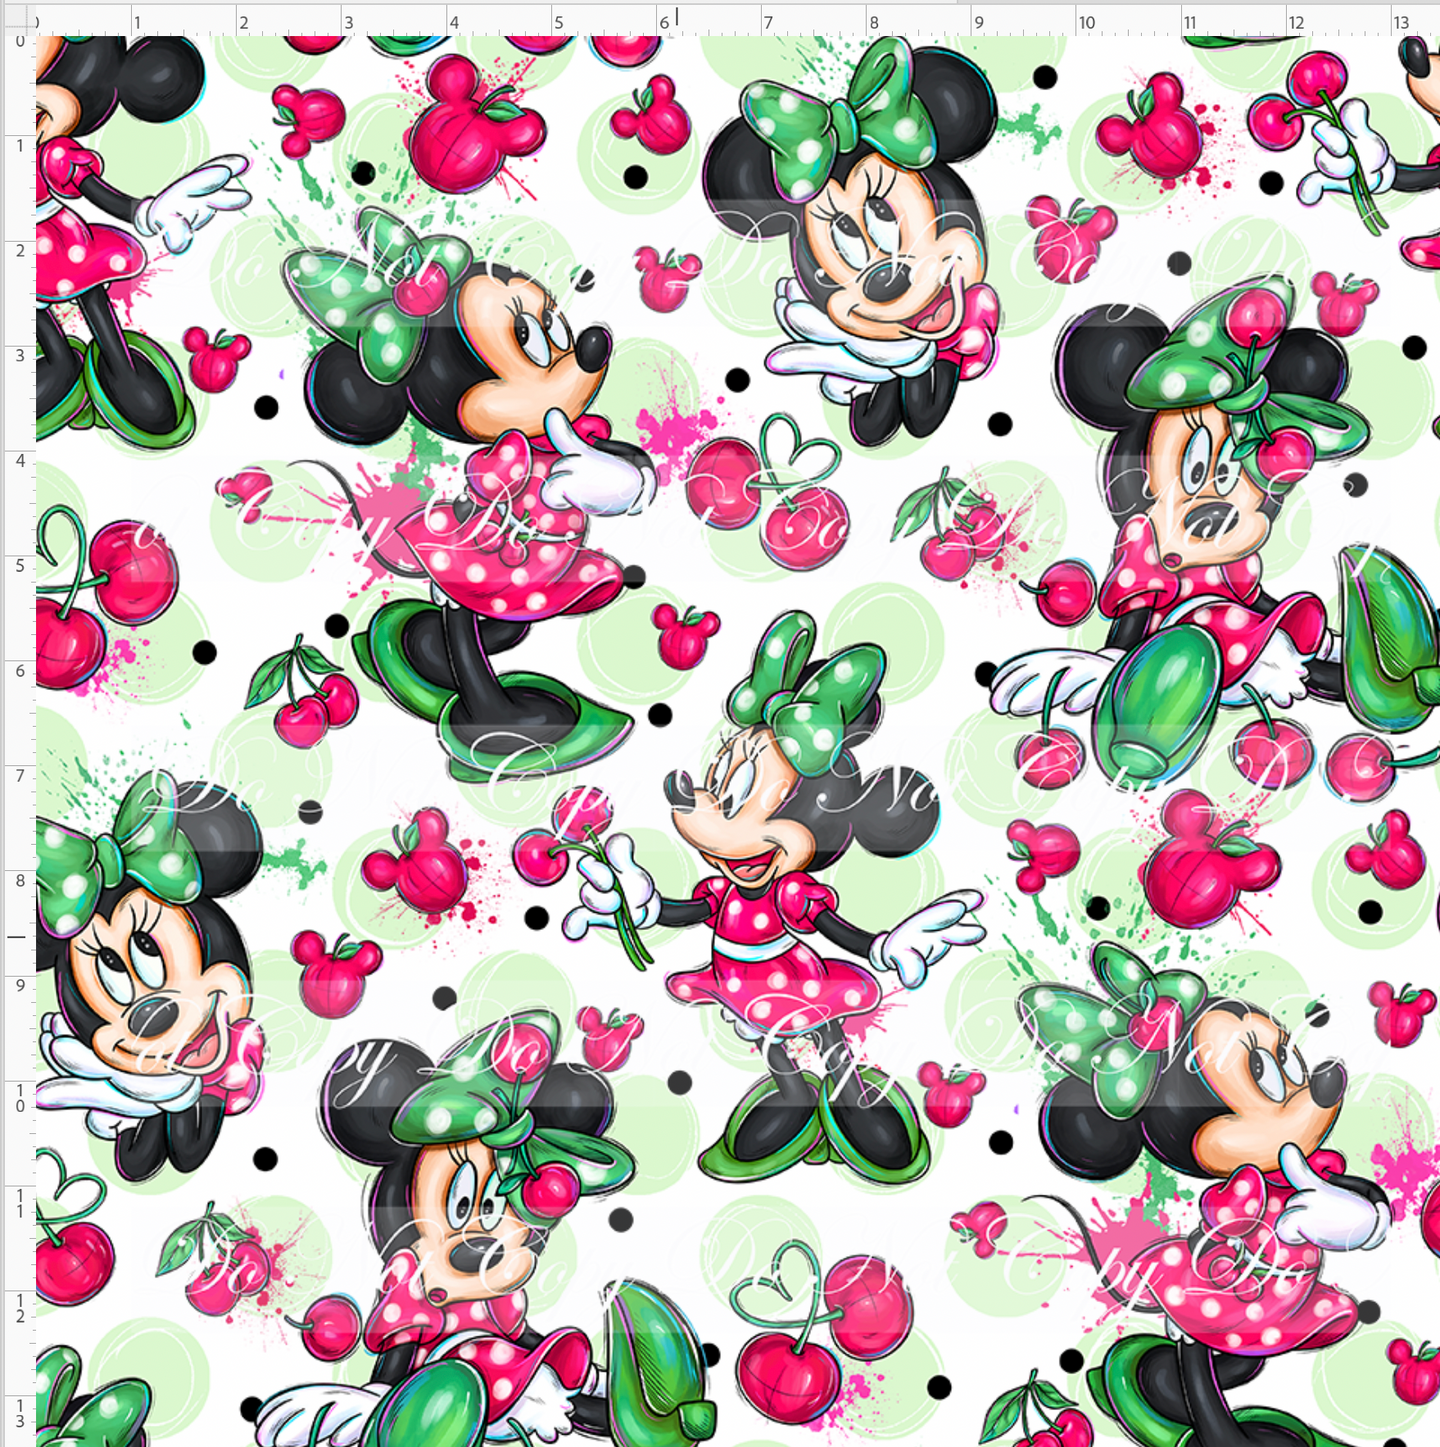 Retail - Minnie Cherry - Main - LARGE SCALE